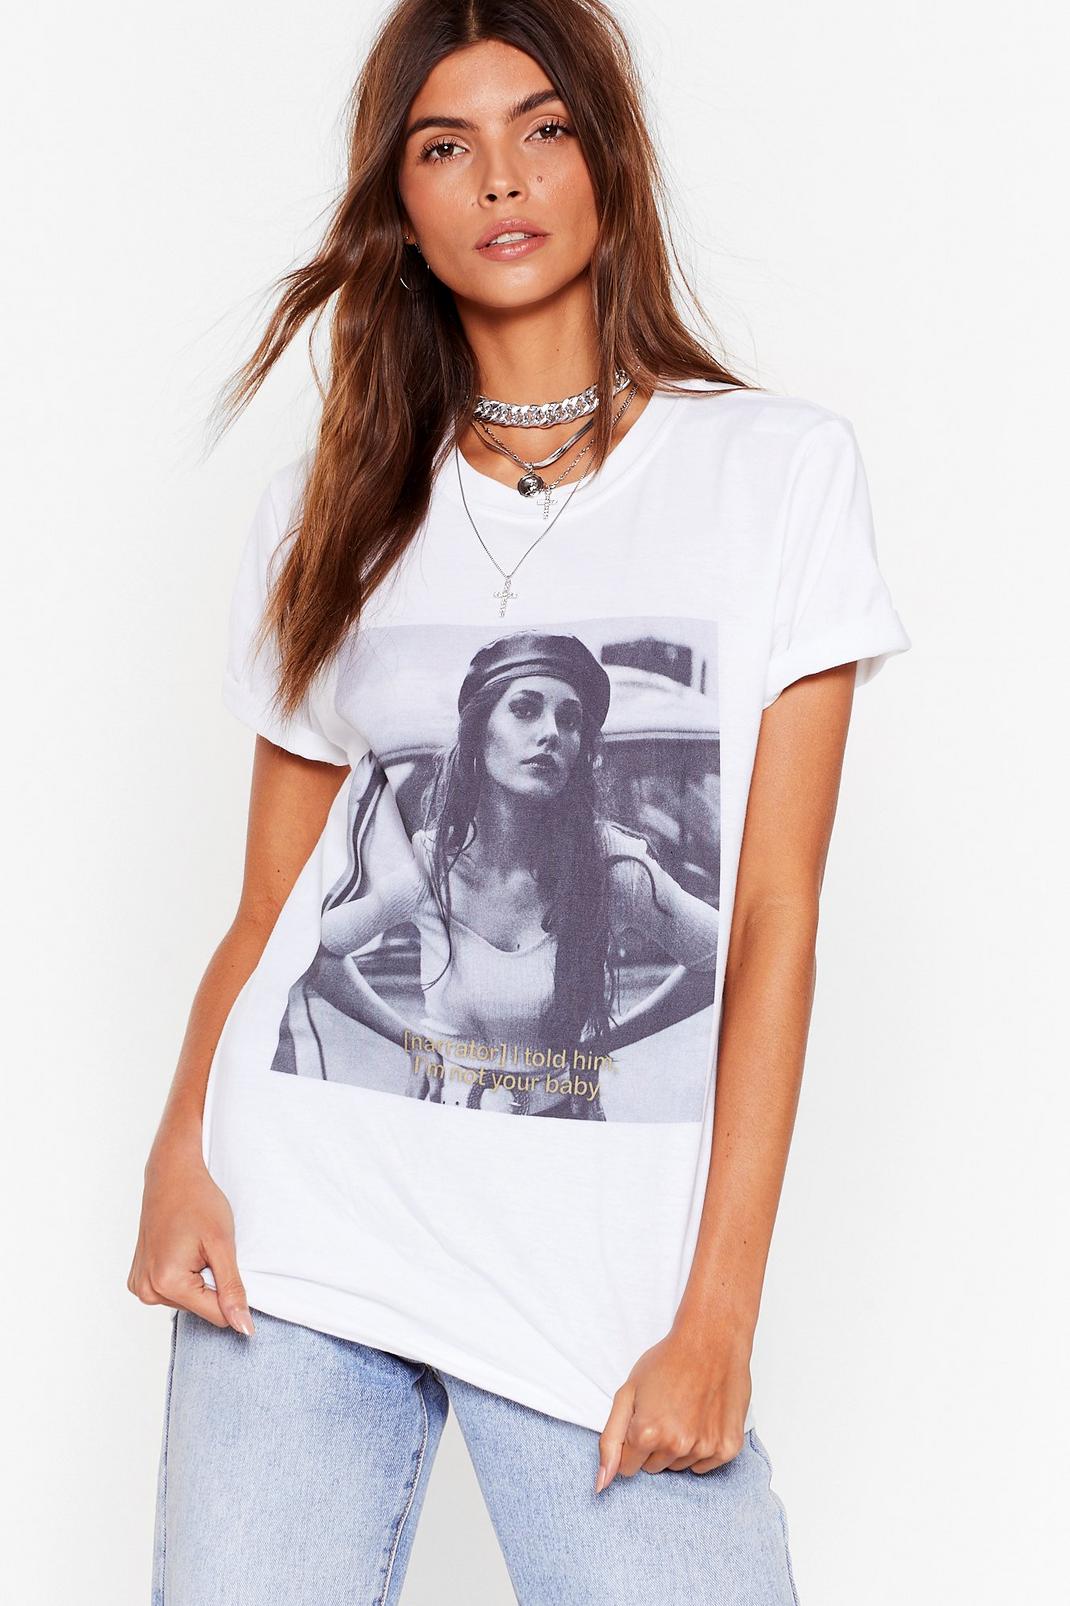 Not Your Baby Relaxed Graphic Tee | Nasty Gal